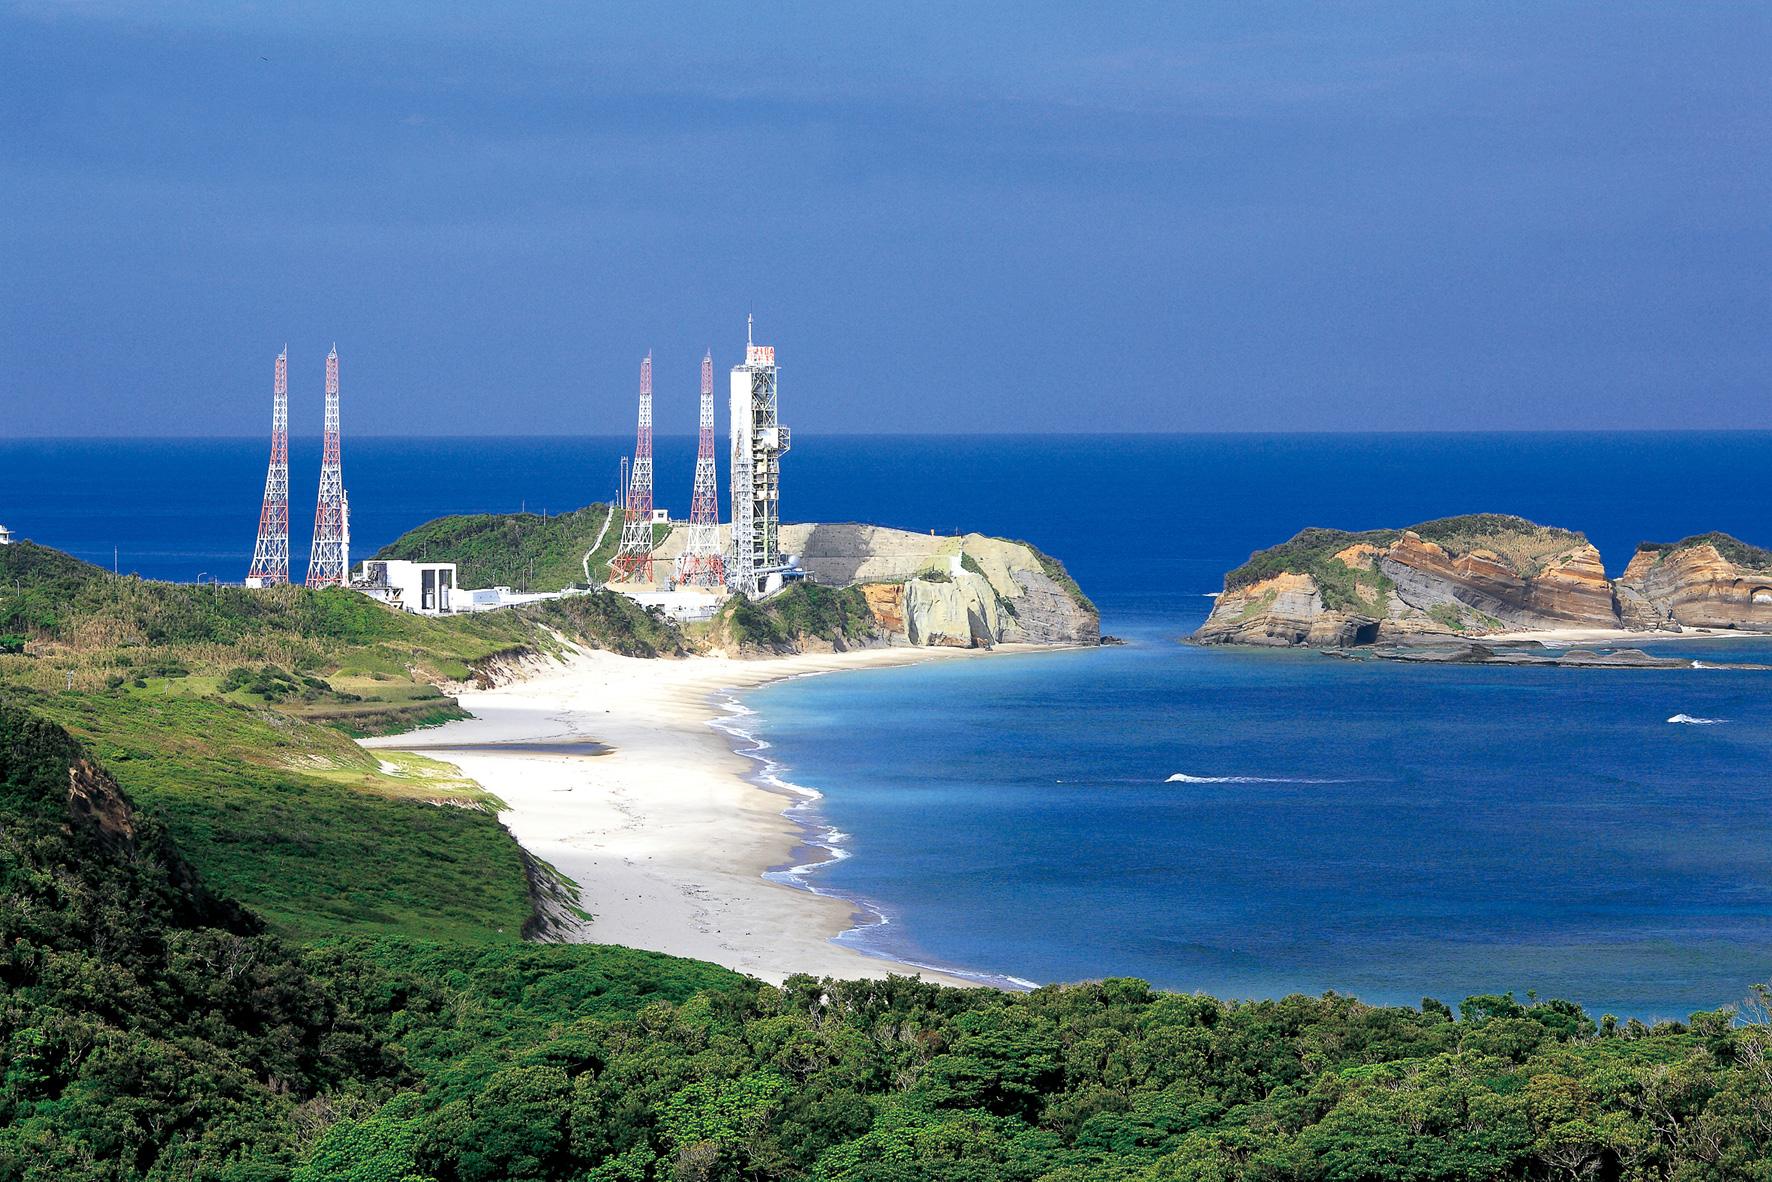 Space up close: the Tanegashima Route-1